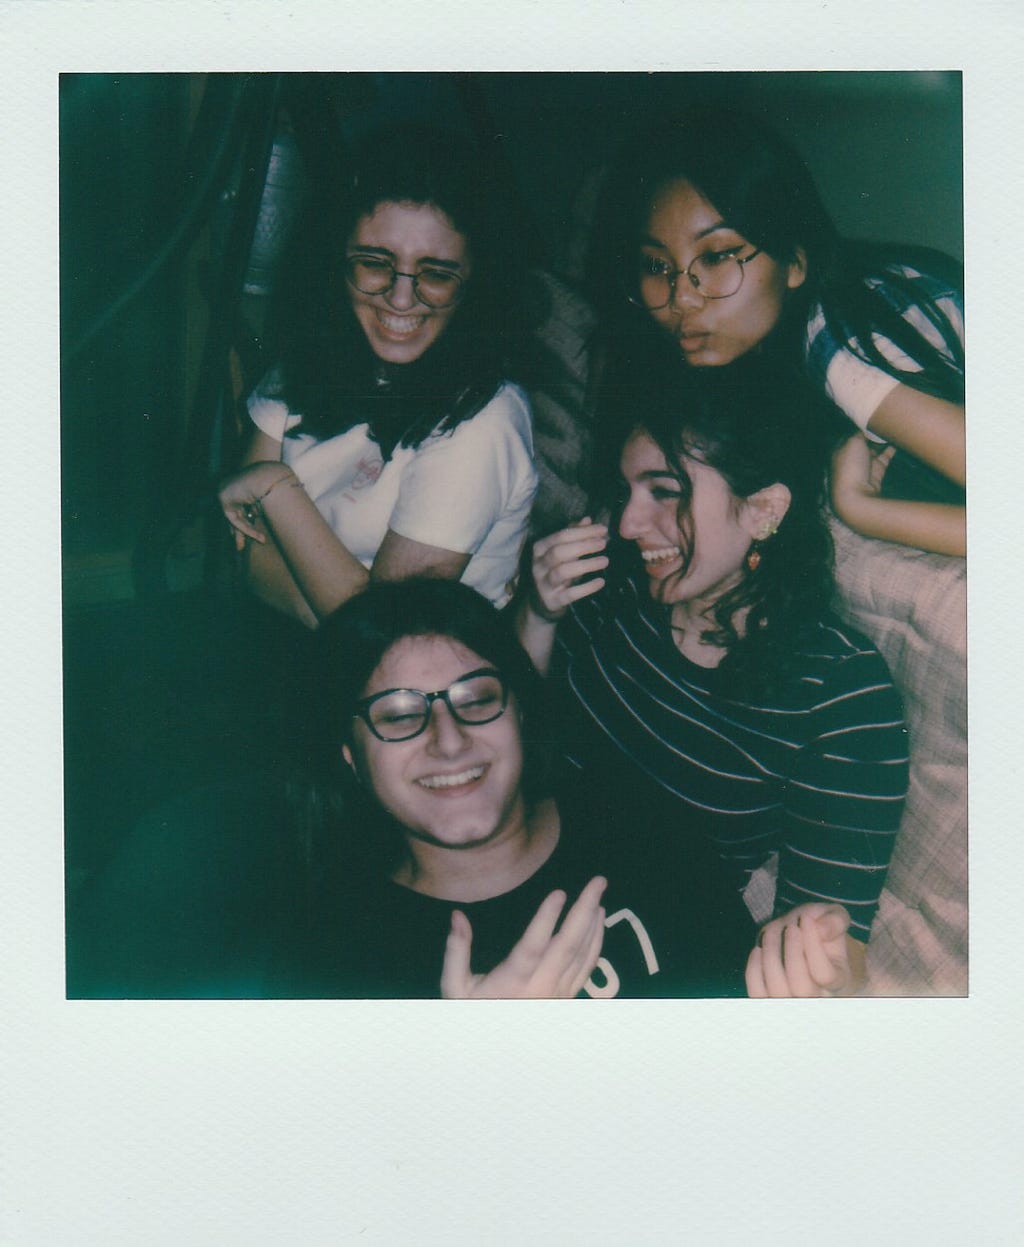 A group of girls smiling in a candid shot on a polaroid.